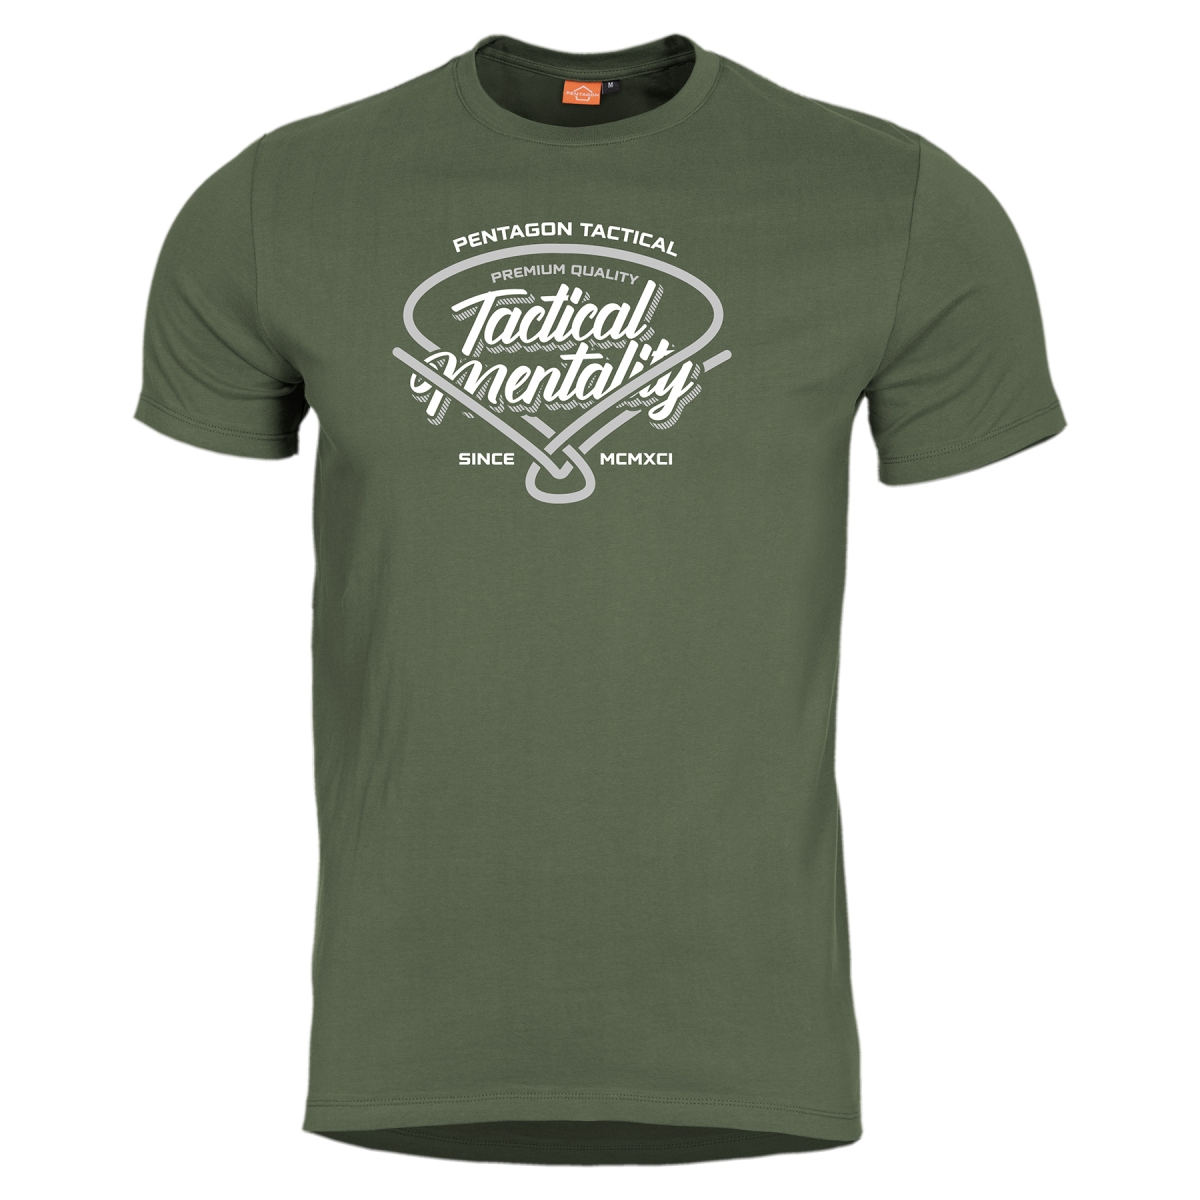 Ageron "Tactical Mentality" T-shirt Olive